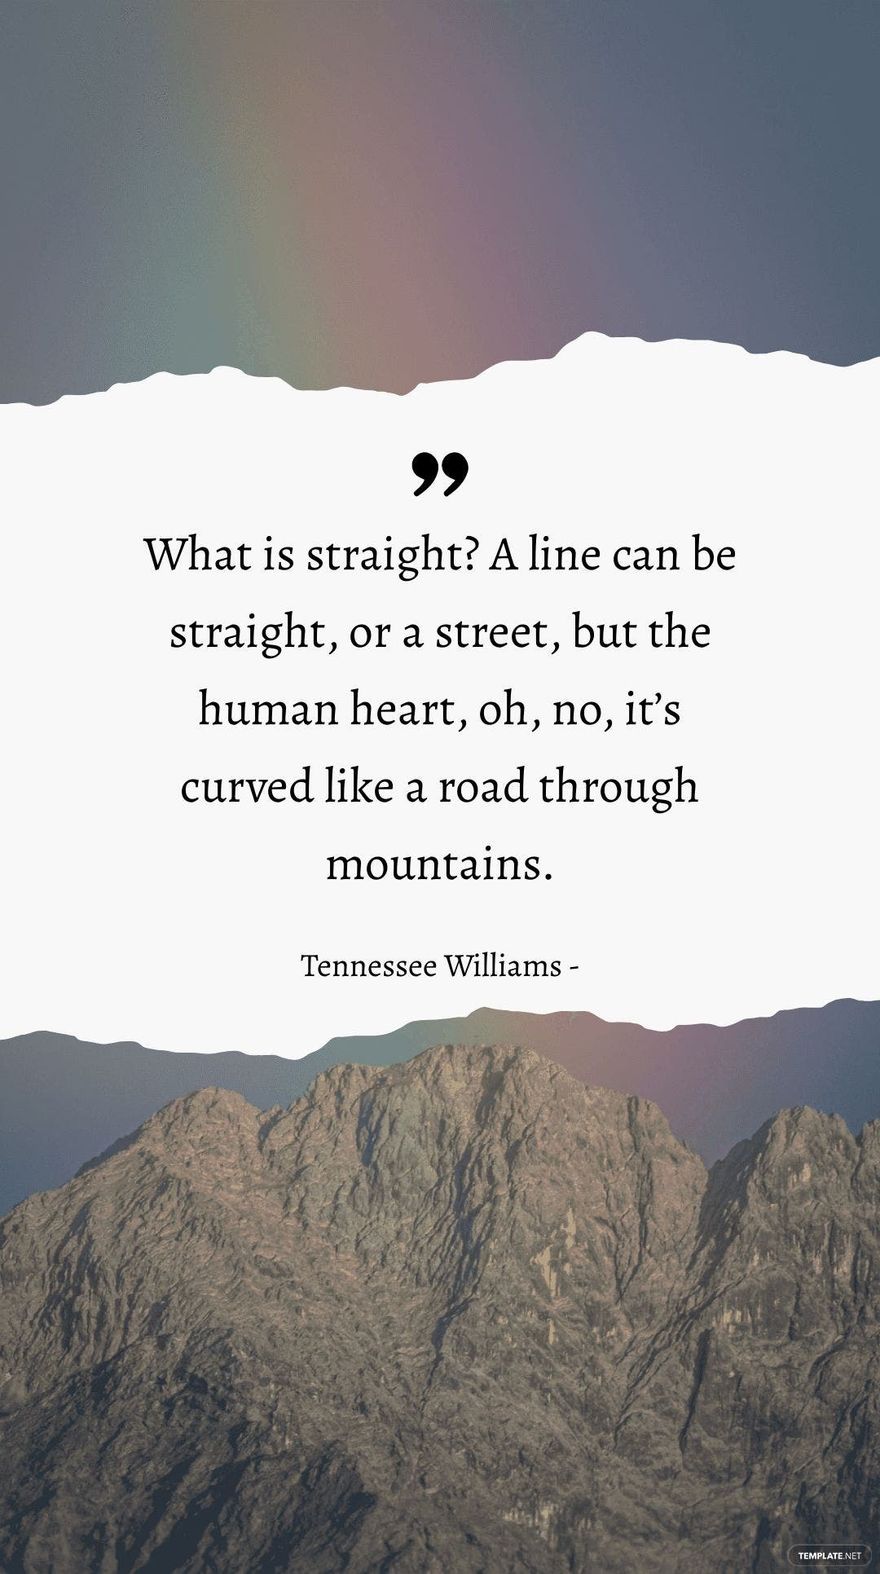 Tennessee Williams - What is straight? A line can be straight, or a street, but the human heart, oh, no, it’s curved like a road through mountains. in JPG